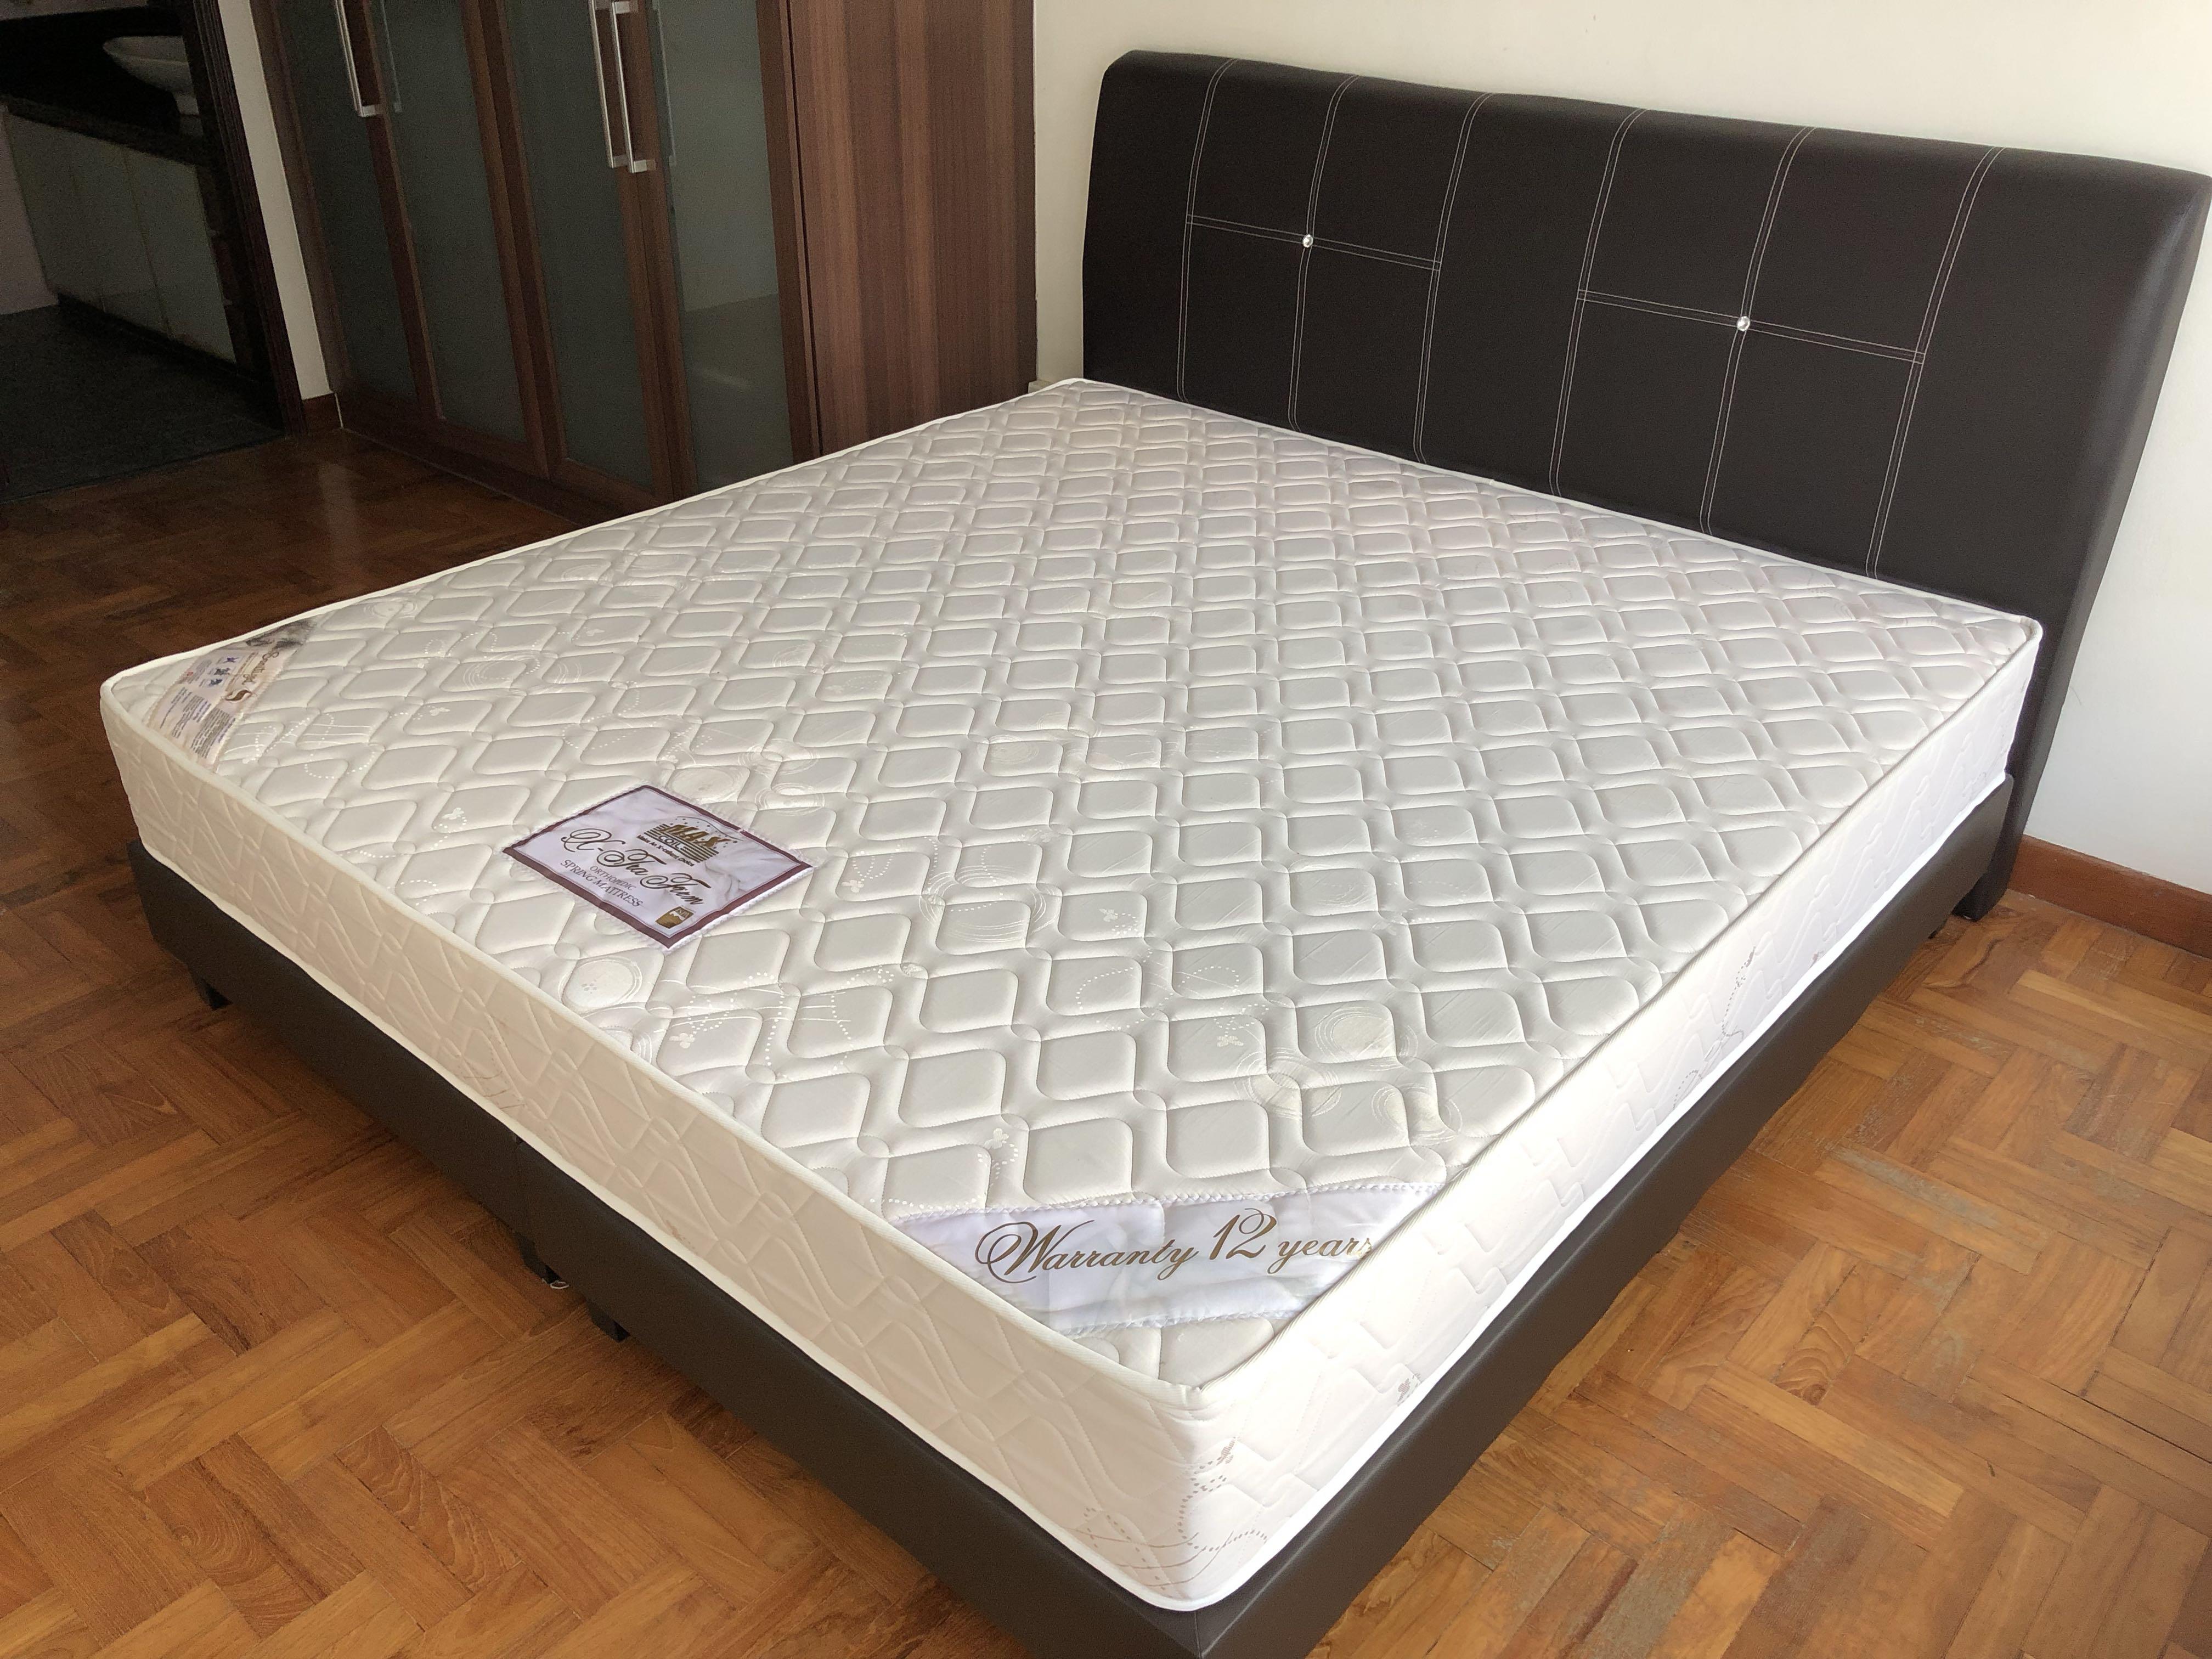 hanwell ex tra firm mattress review